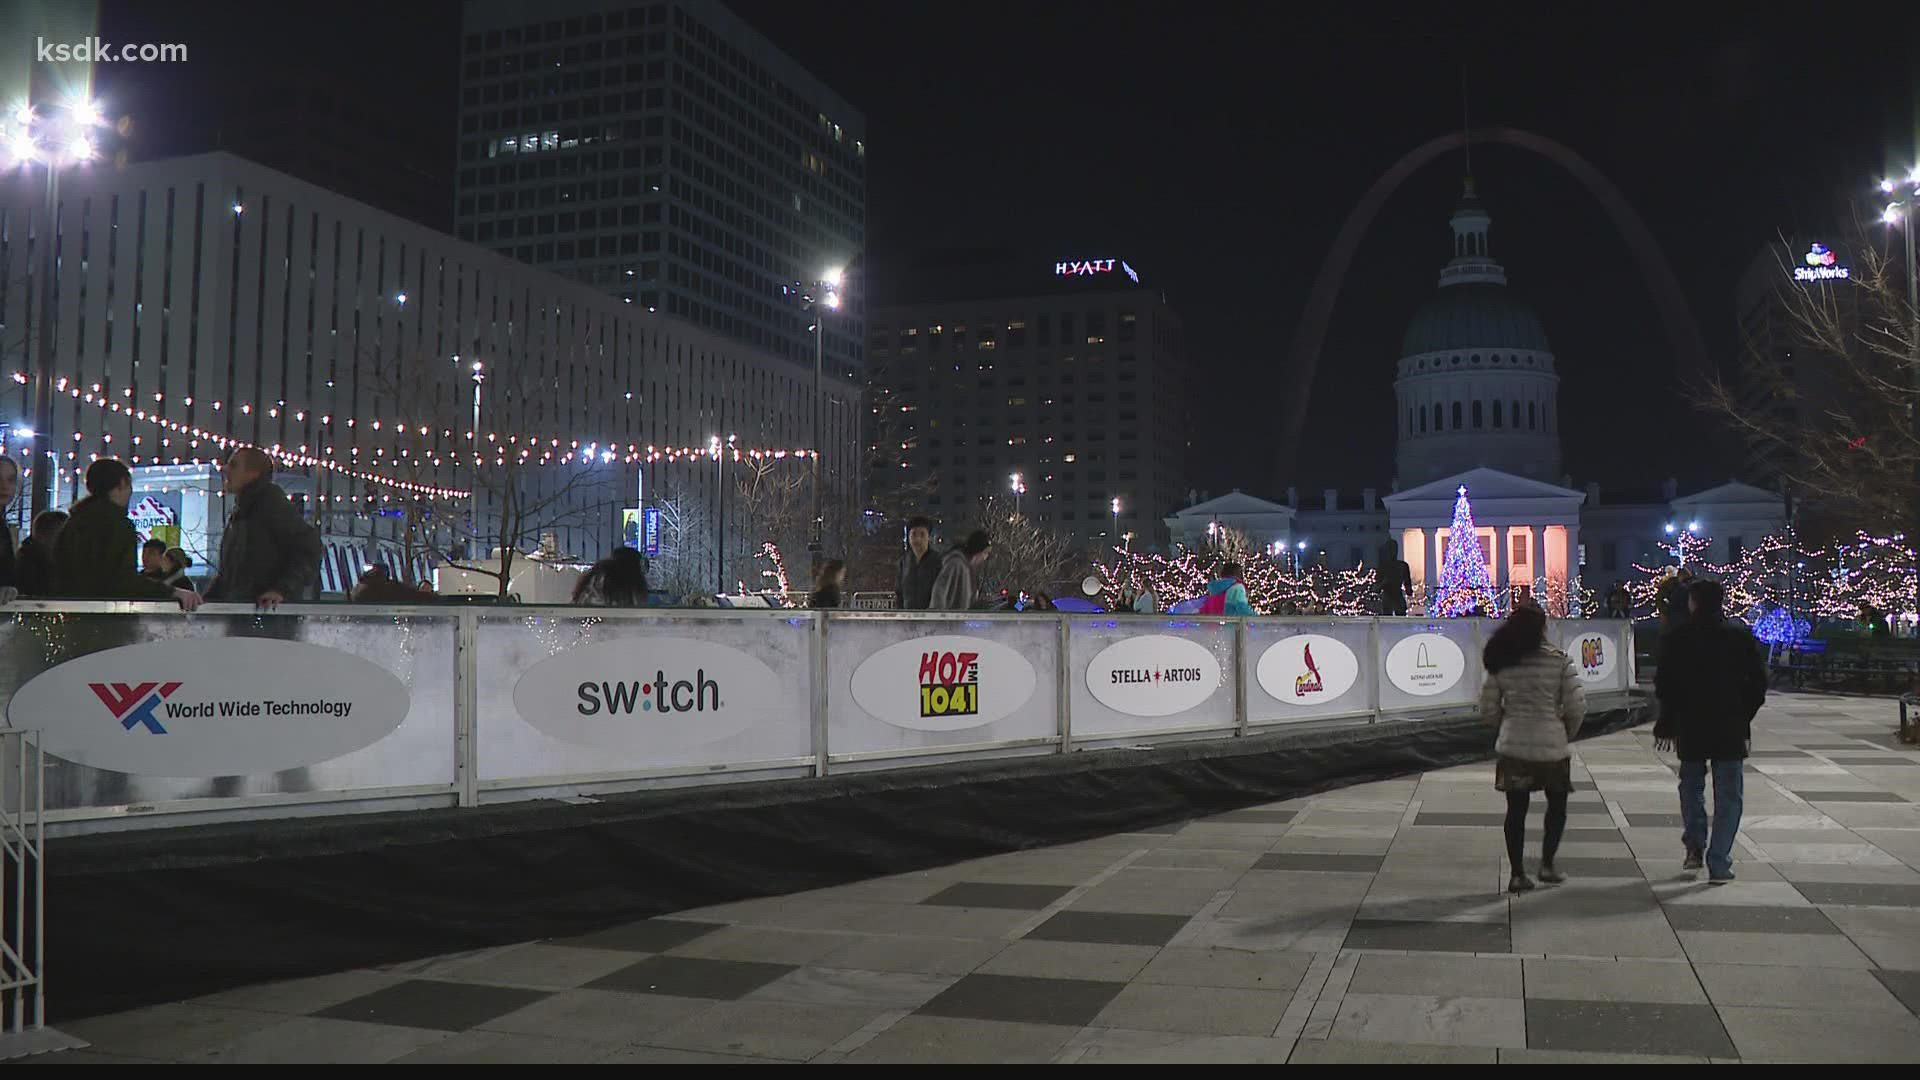 Winterfest in Kiener Plaza was canceled Friday amid a surge of COVID-19 cases. Health experts in the region urged people to avoid large New Year's Eve celebrations.